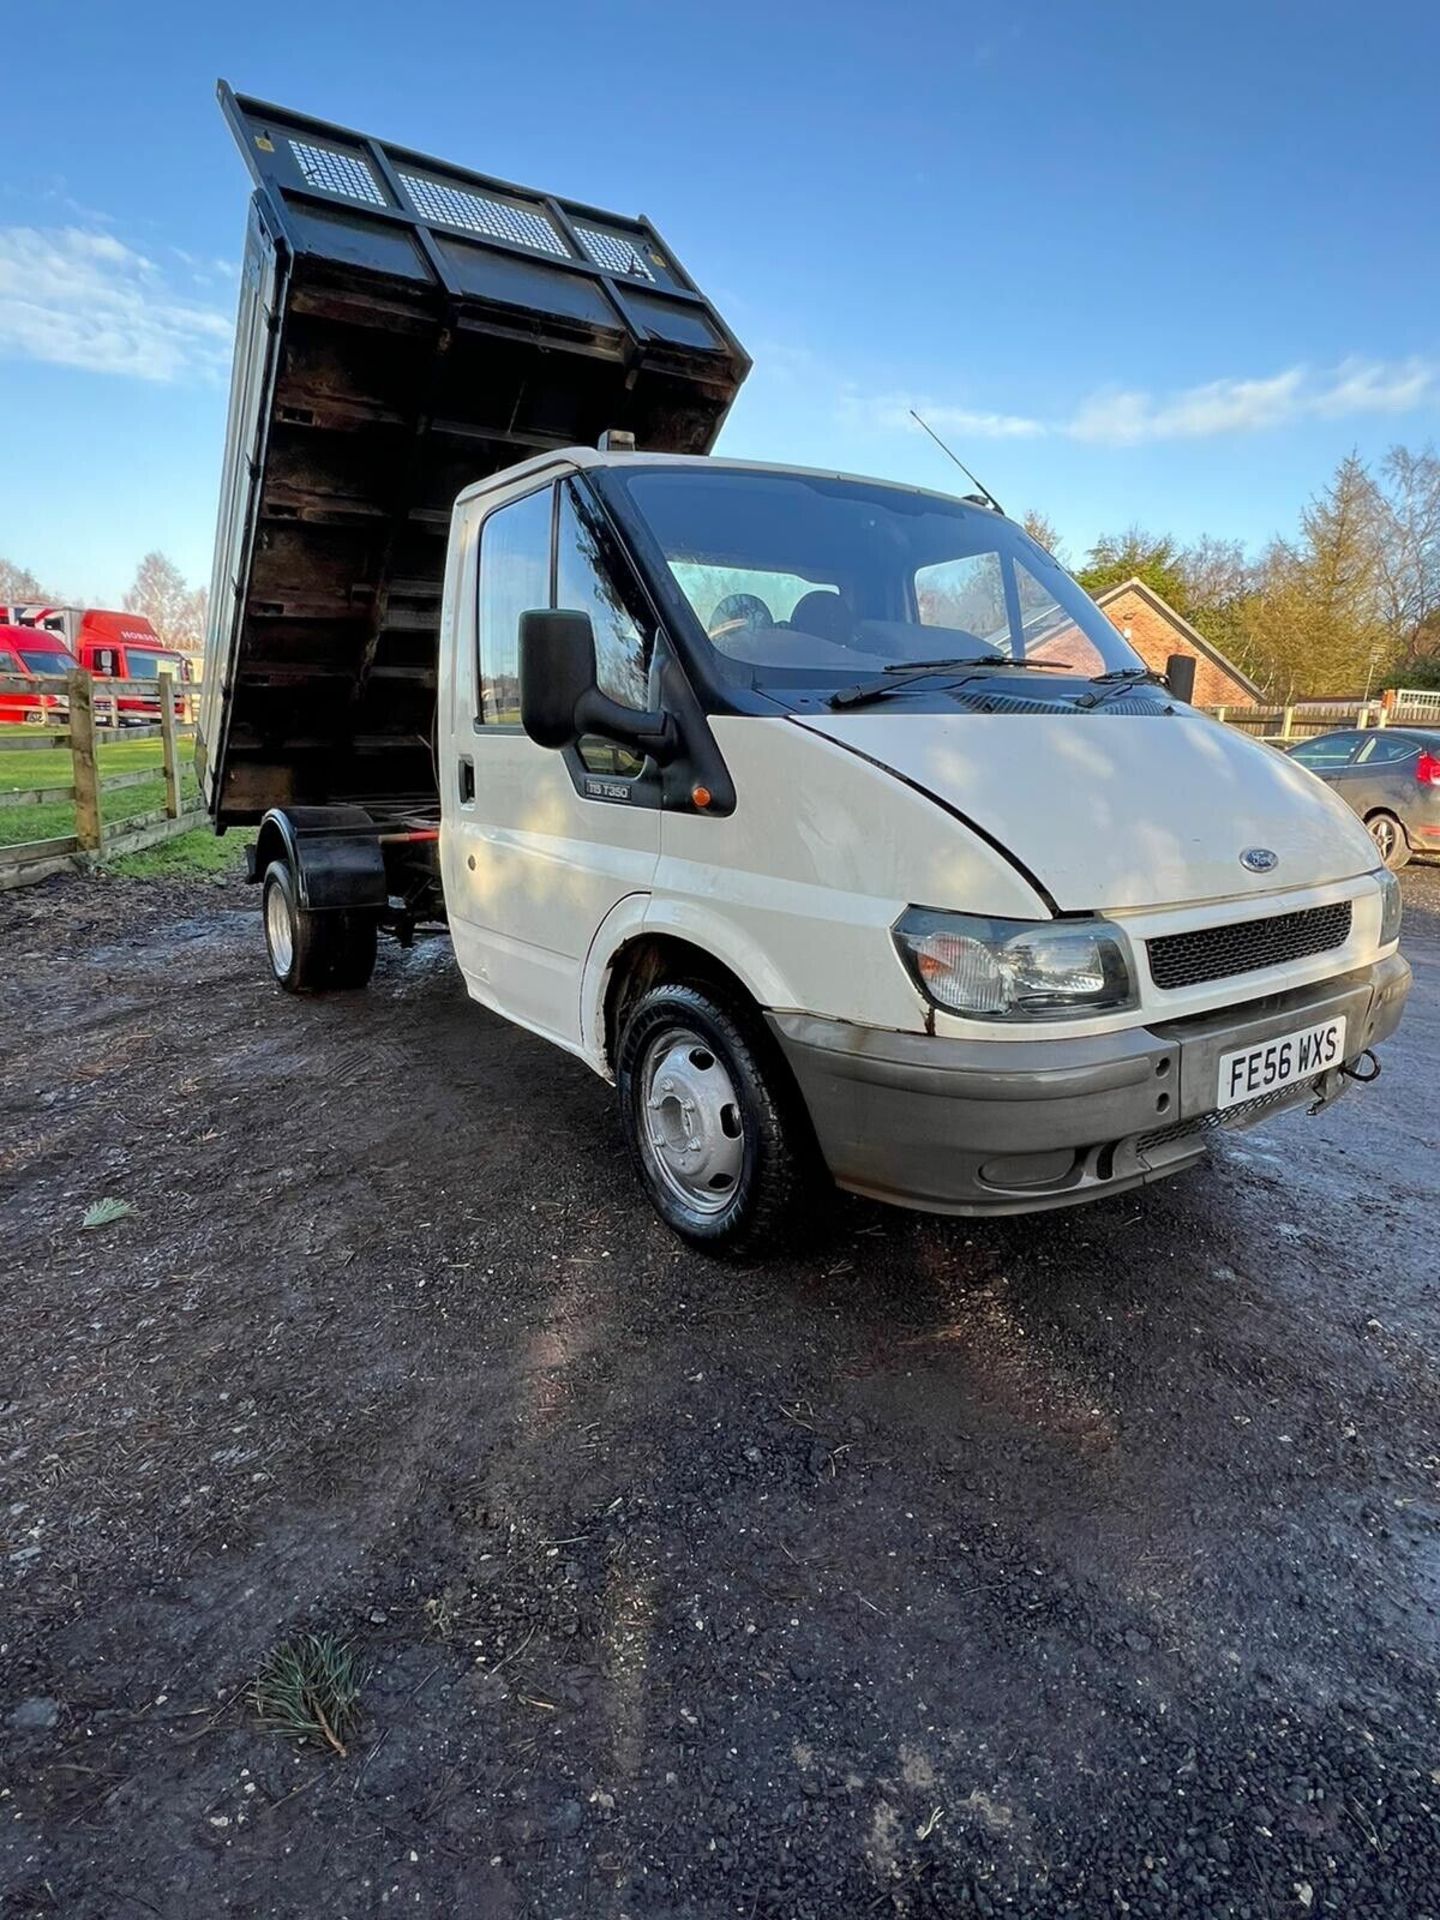 FORD TRANSIT TIPPER LORRY TWIN WHEEL TIPPING TRUCK LONG TEST MANUAL 120K 2006 - Image 9 of 14